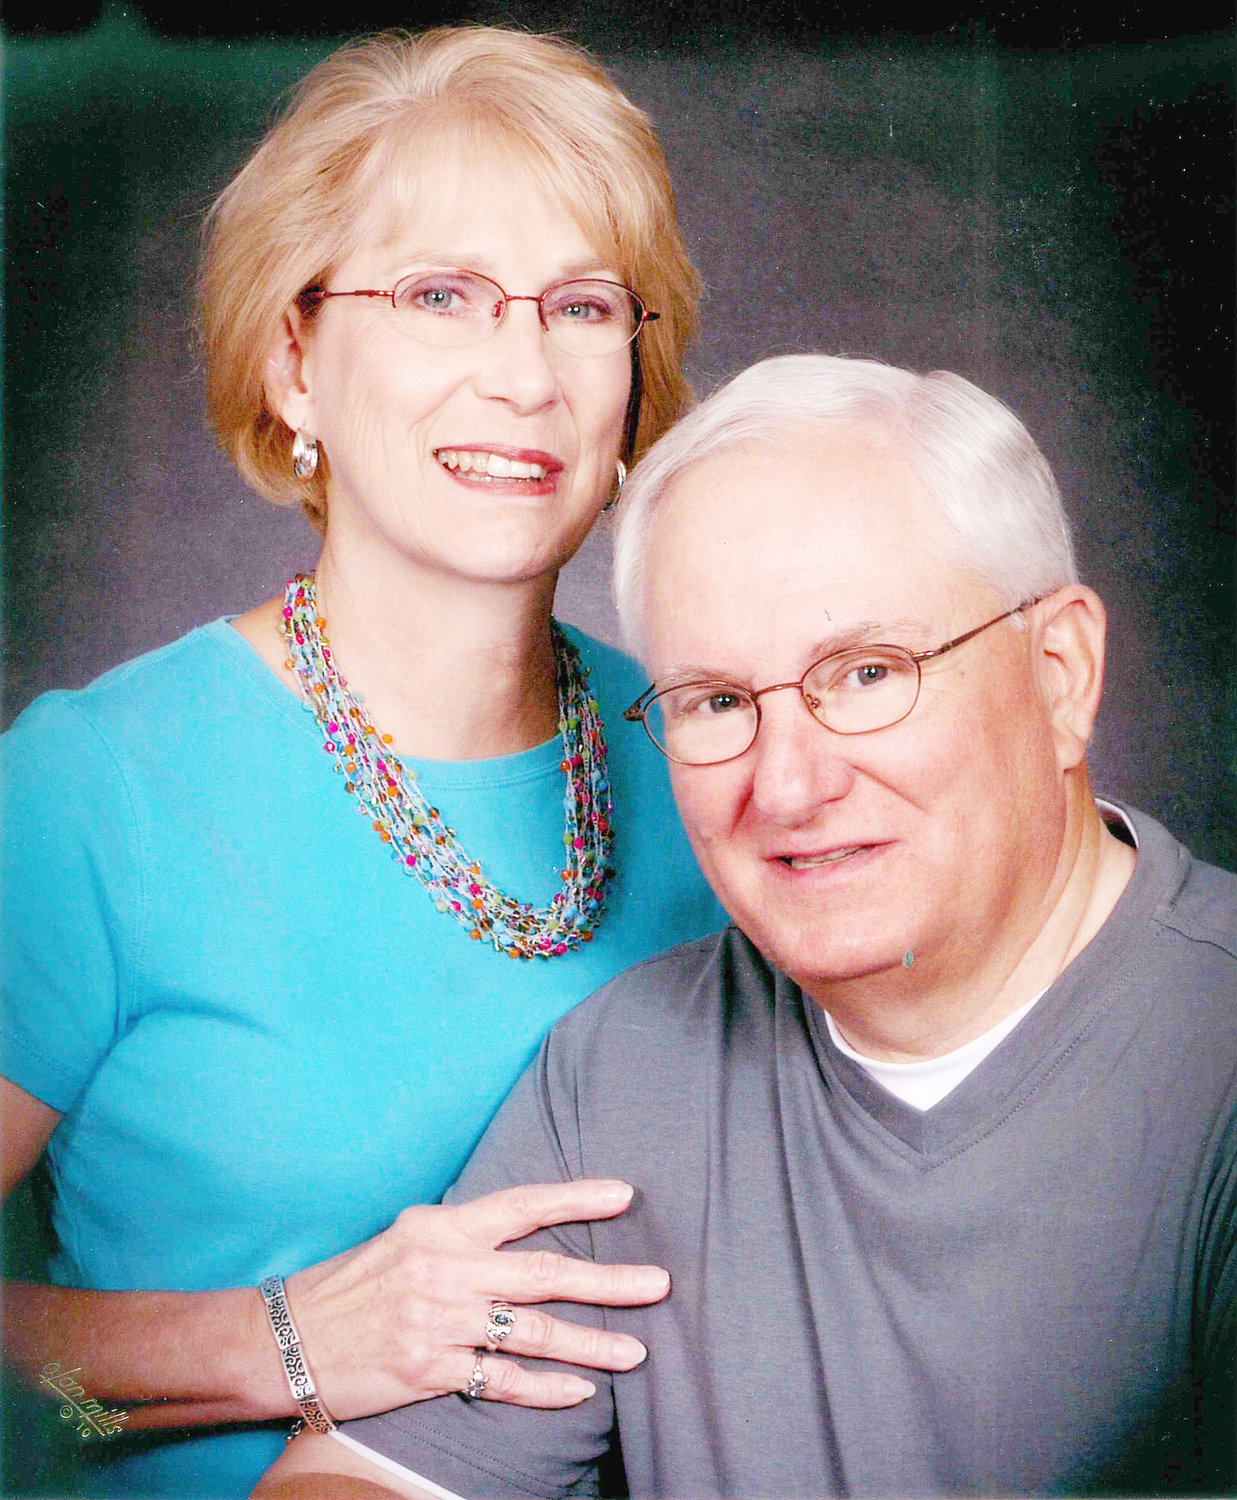 Perry and Margie McDonald of Lindale celebrated their 50th wedding anniversary on Sept. 2 with a trip to San Antonio with their children and grandchildren. They were married Sept. 2, 1966 at First United Methodist Church of Mineola. They have resided in Lindale since 1969.